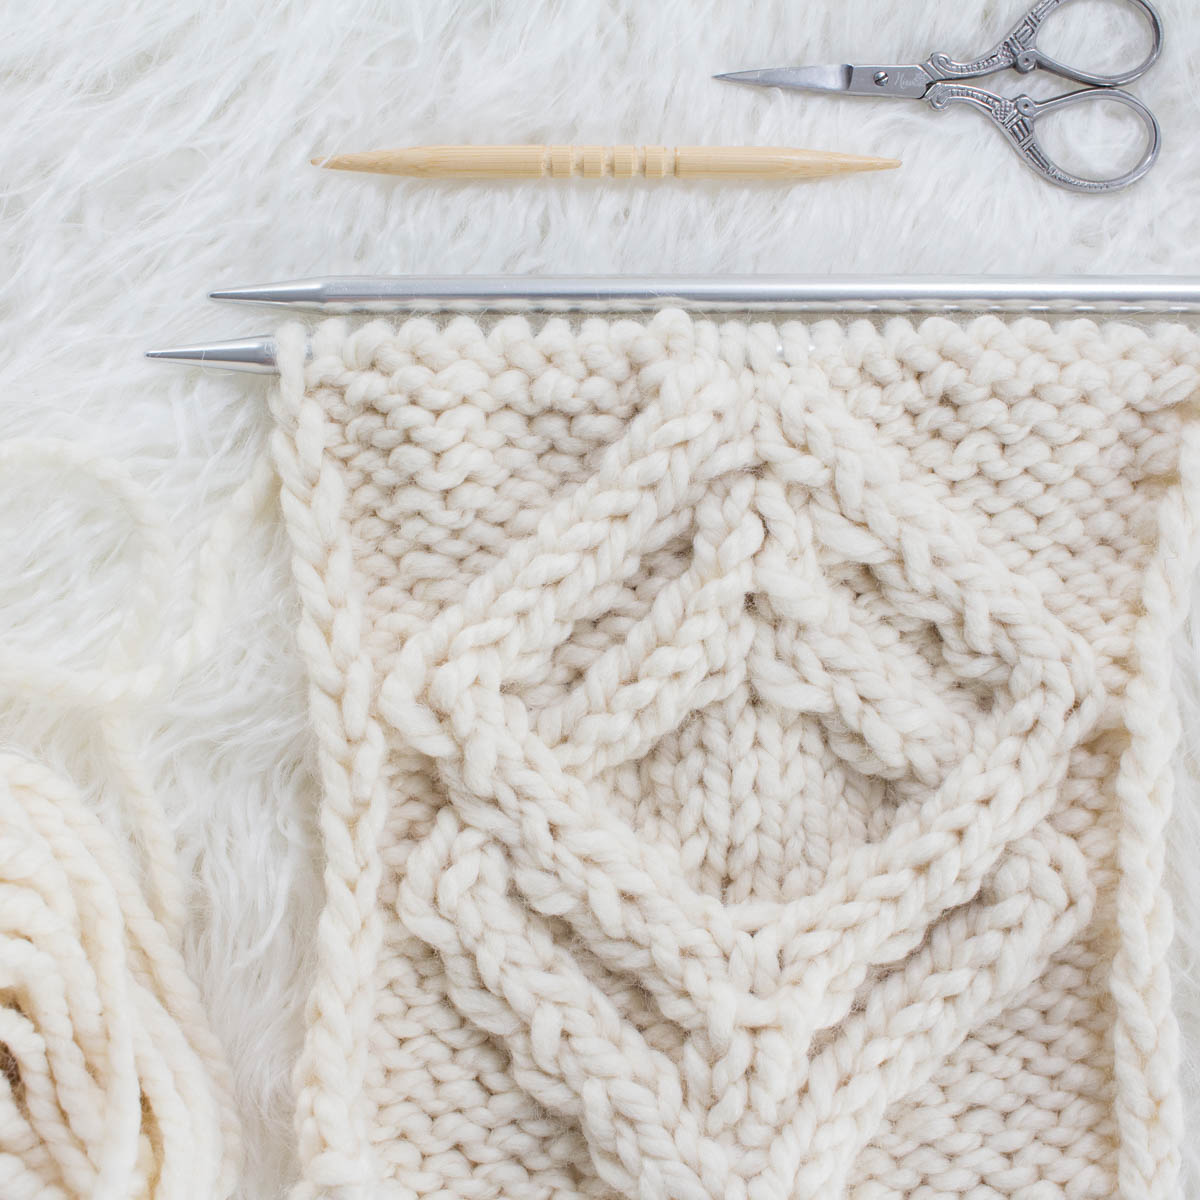 Continental Style Knitting 101 Video Tutorial : Brome Fields